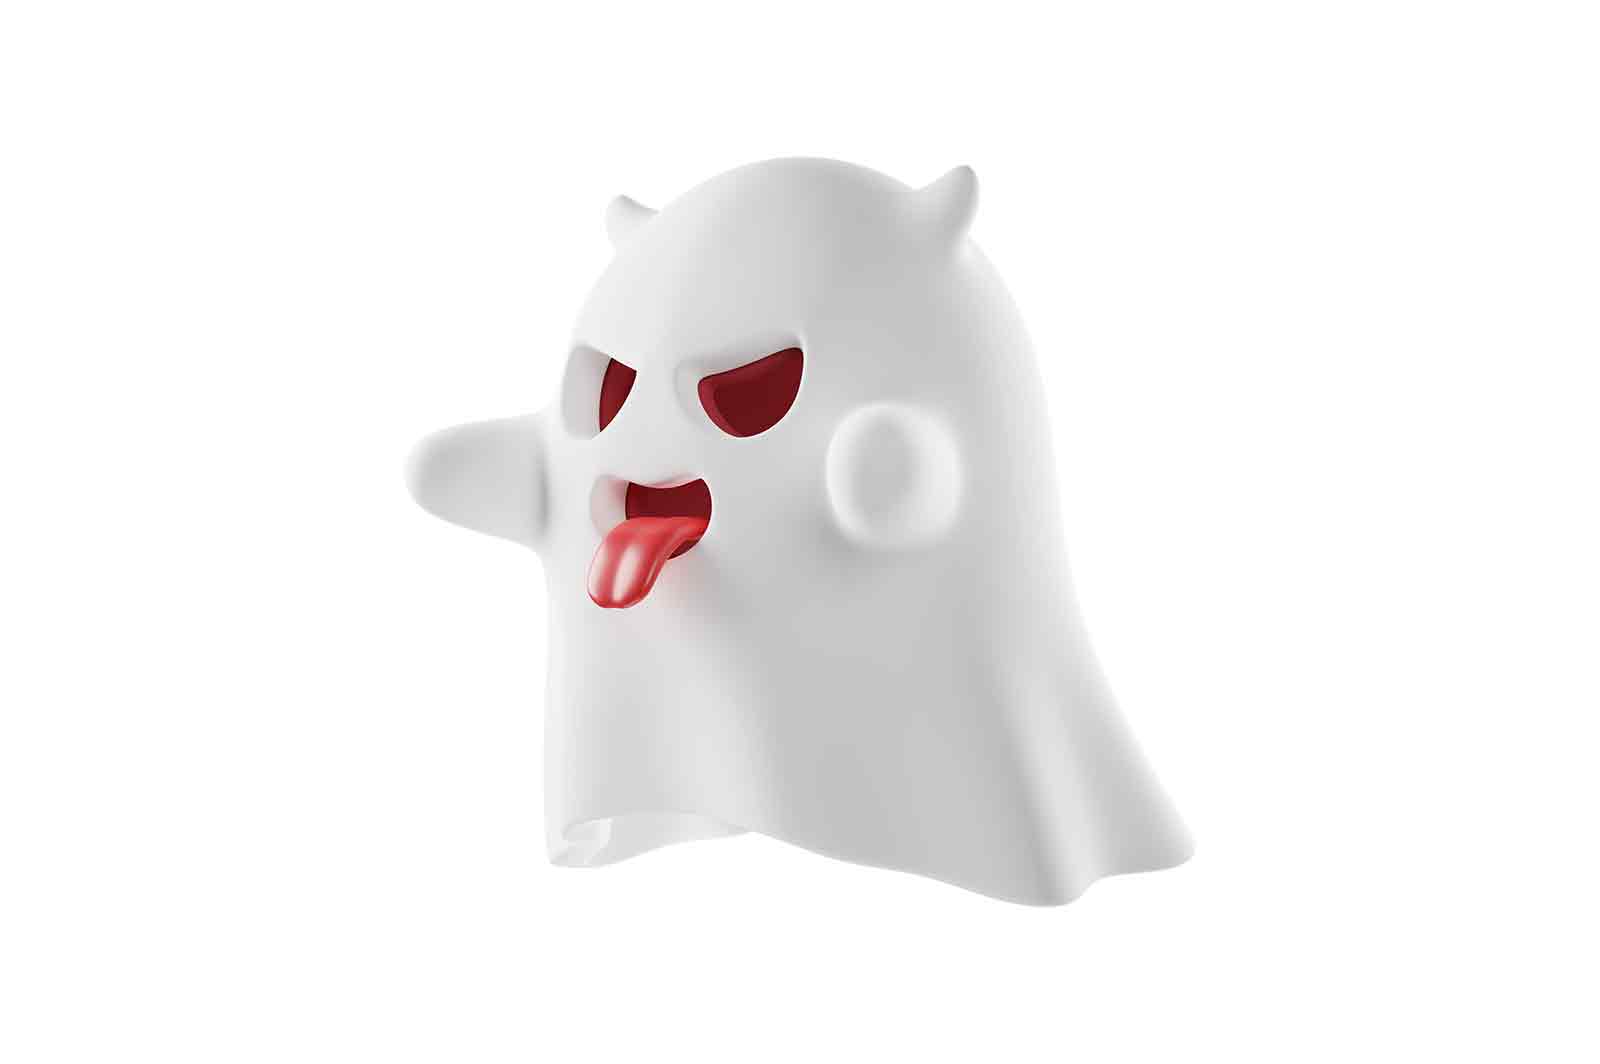 White cunning ghost for halloween 3d rendered illustration. Cartoon horror character showing tongue. Happy halloween day